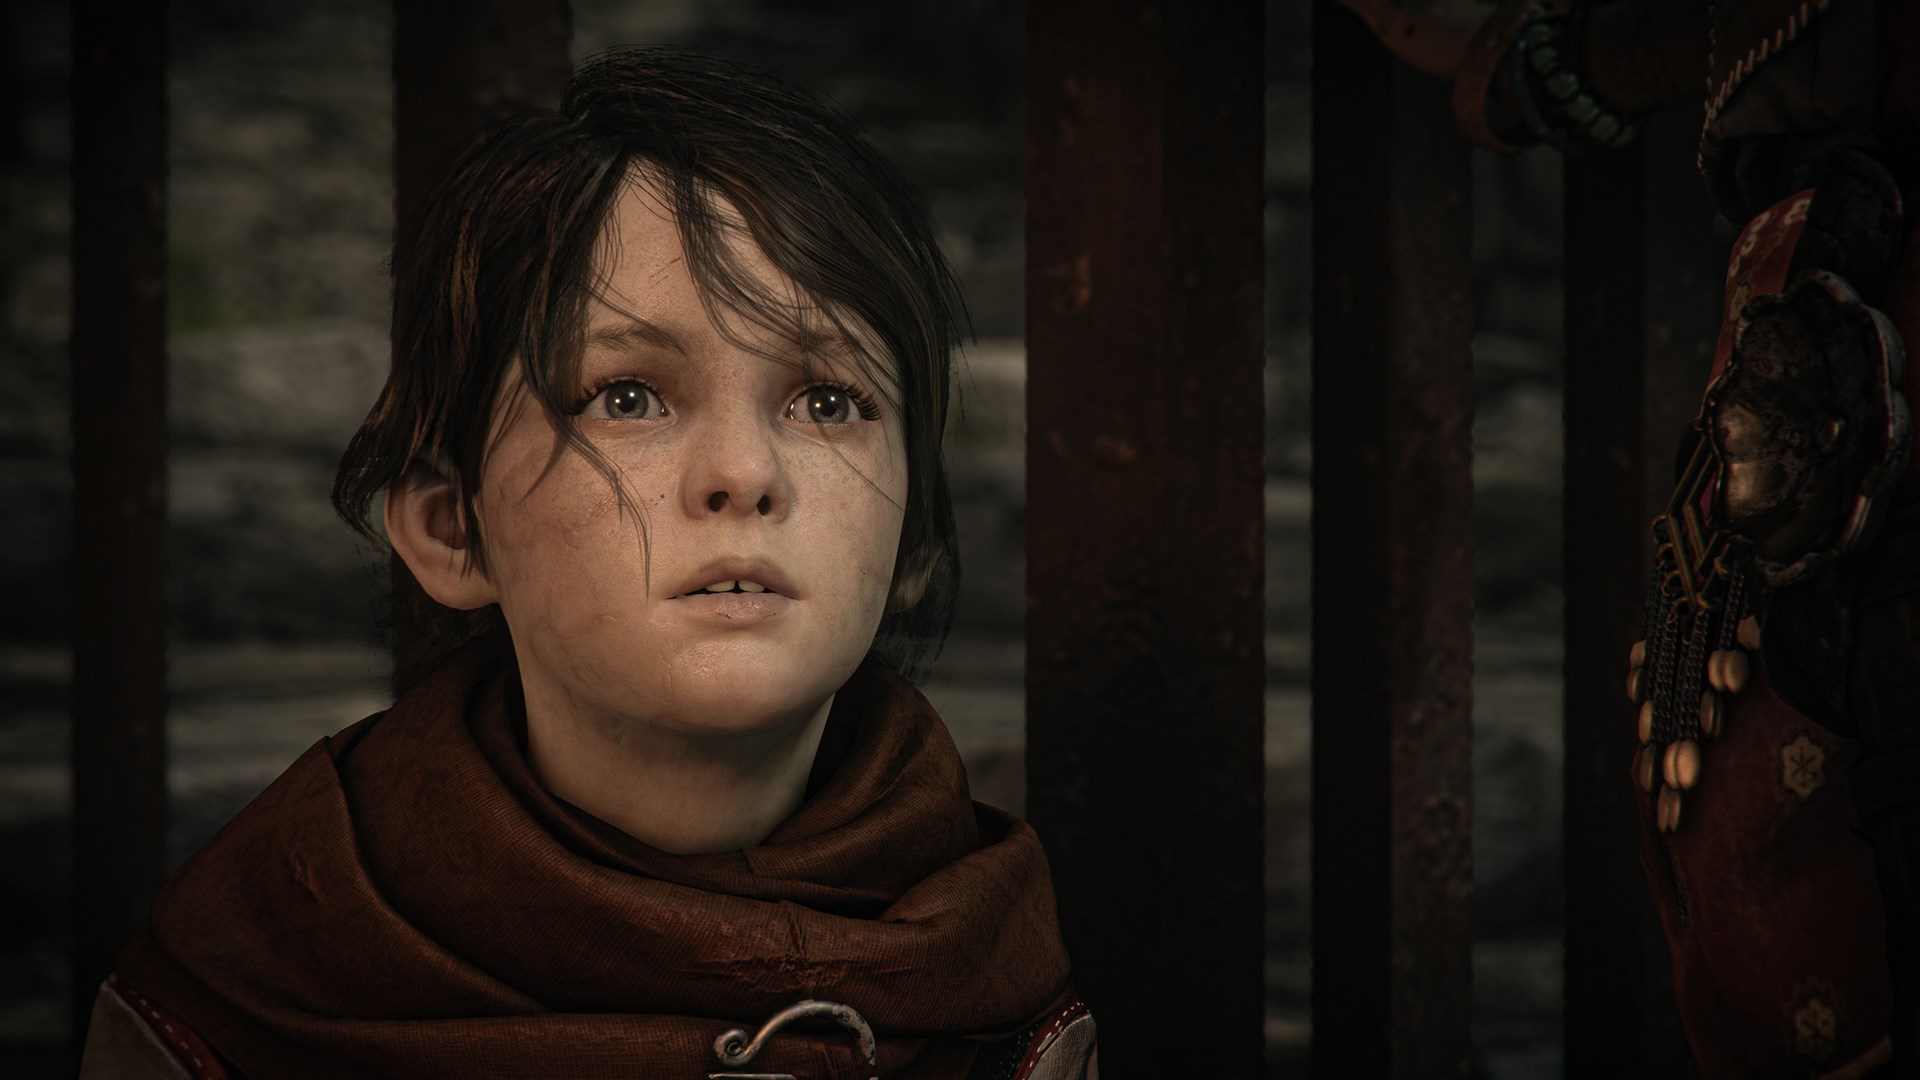 A Plague Tale: Requiem is now available on Xbox Series X, S, Game Pass, PS5,  PC